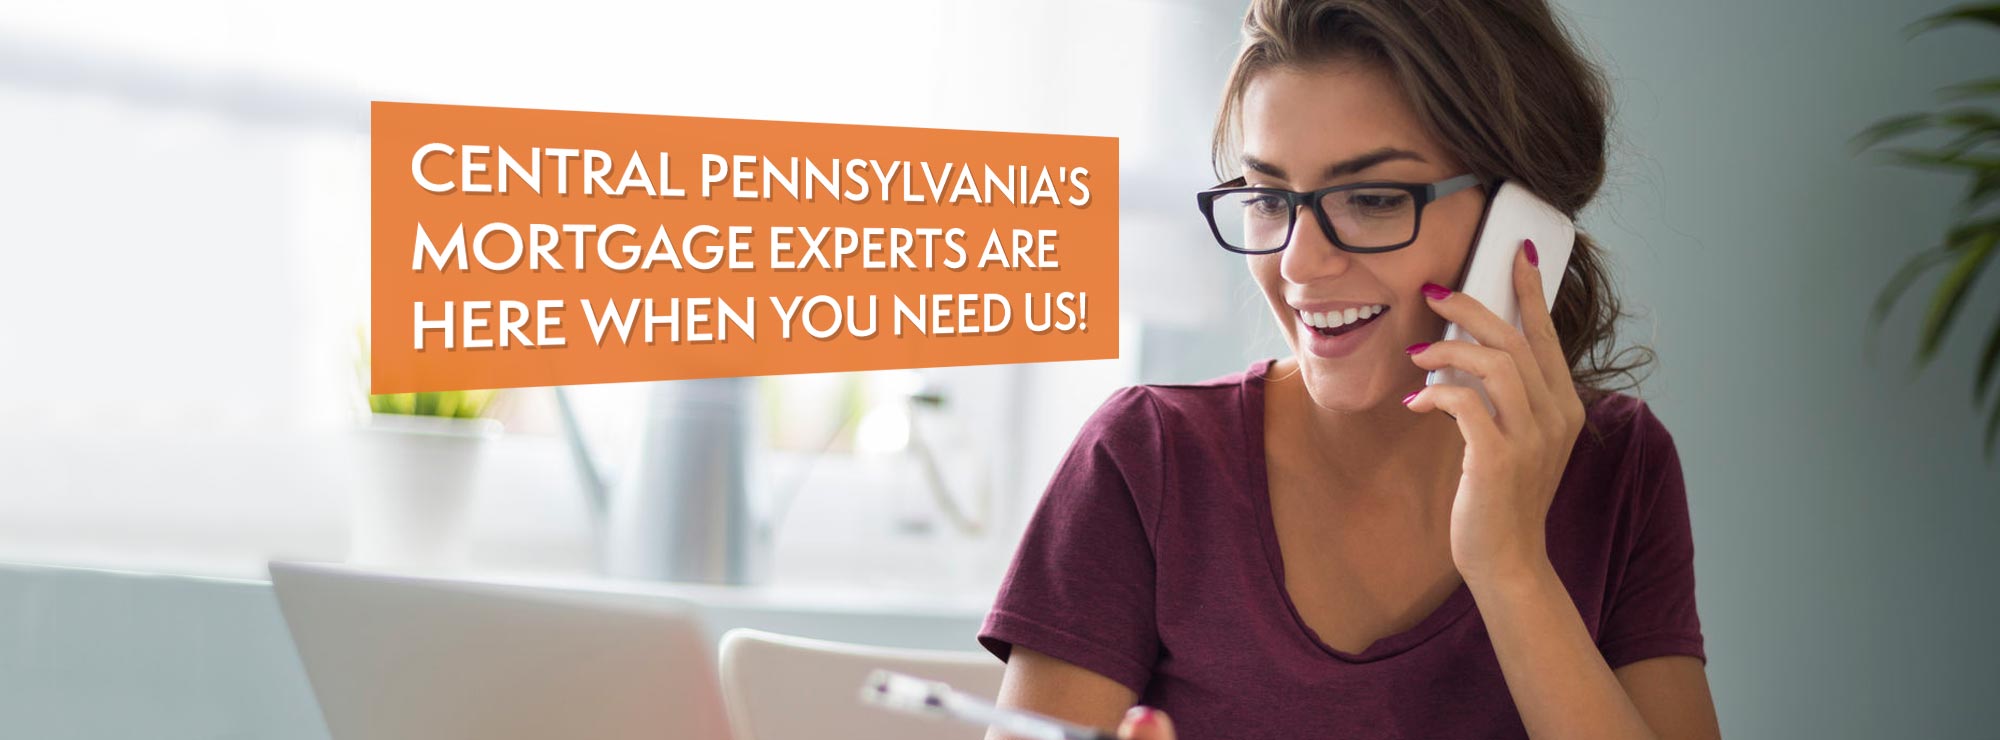 Central Pennsylvania's Mortgage Experts Are Here When You Need Us!